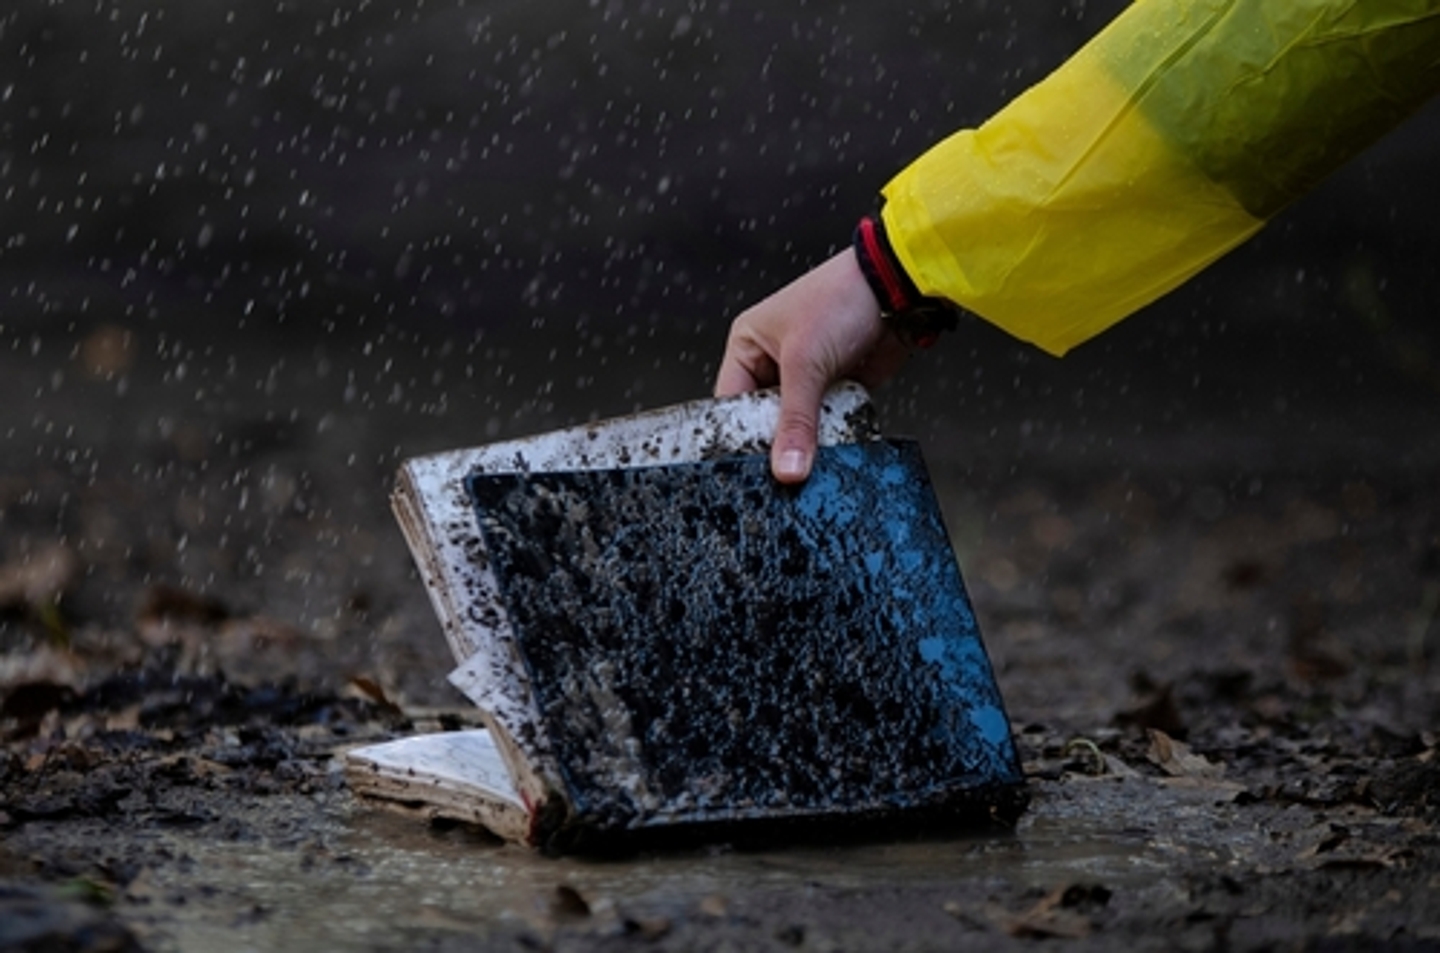 Moisture and damp can cause significant damage to books. SERVPRO has compiled a guide to drying a wet book that you can use.